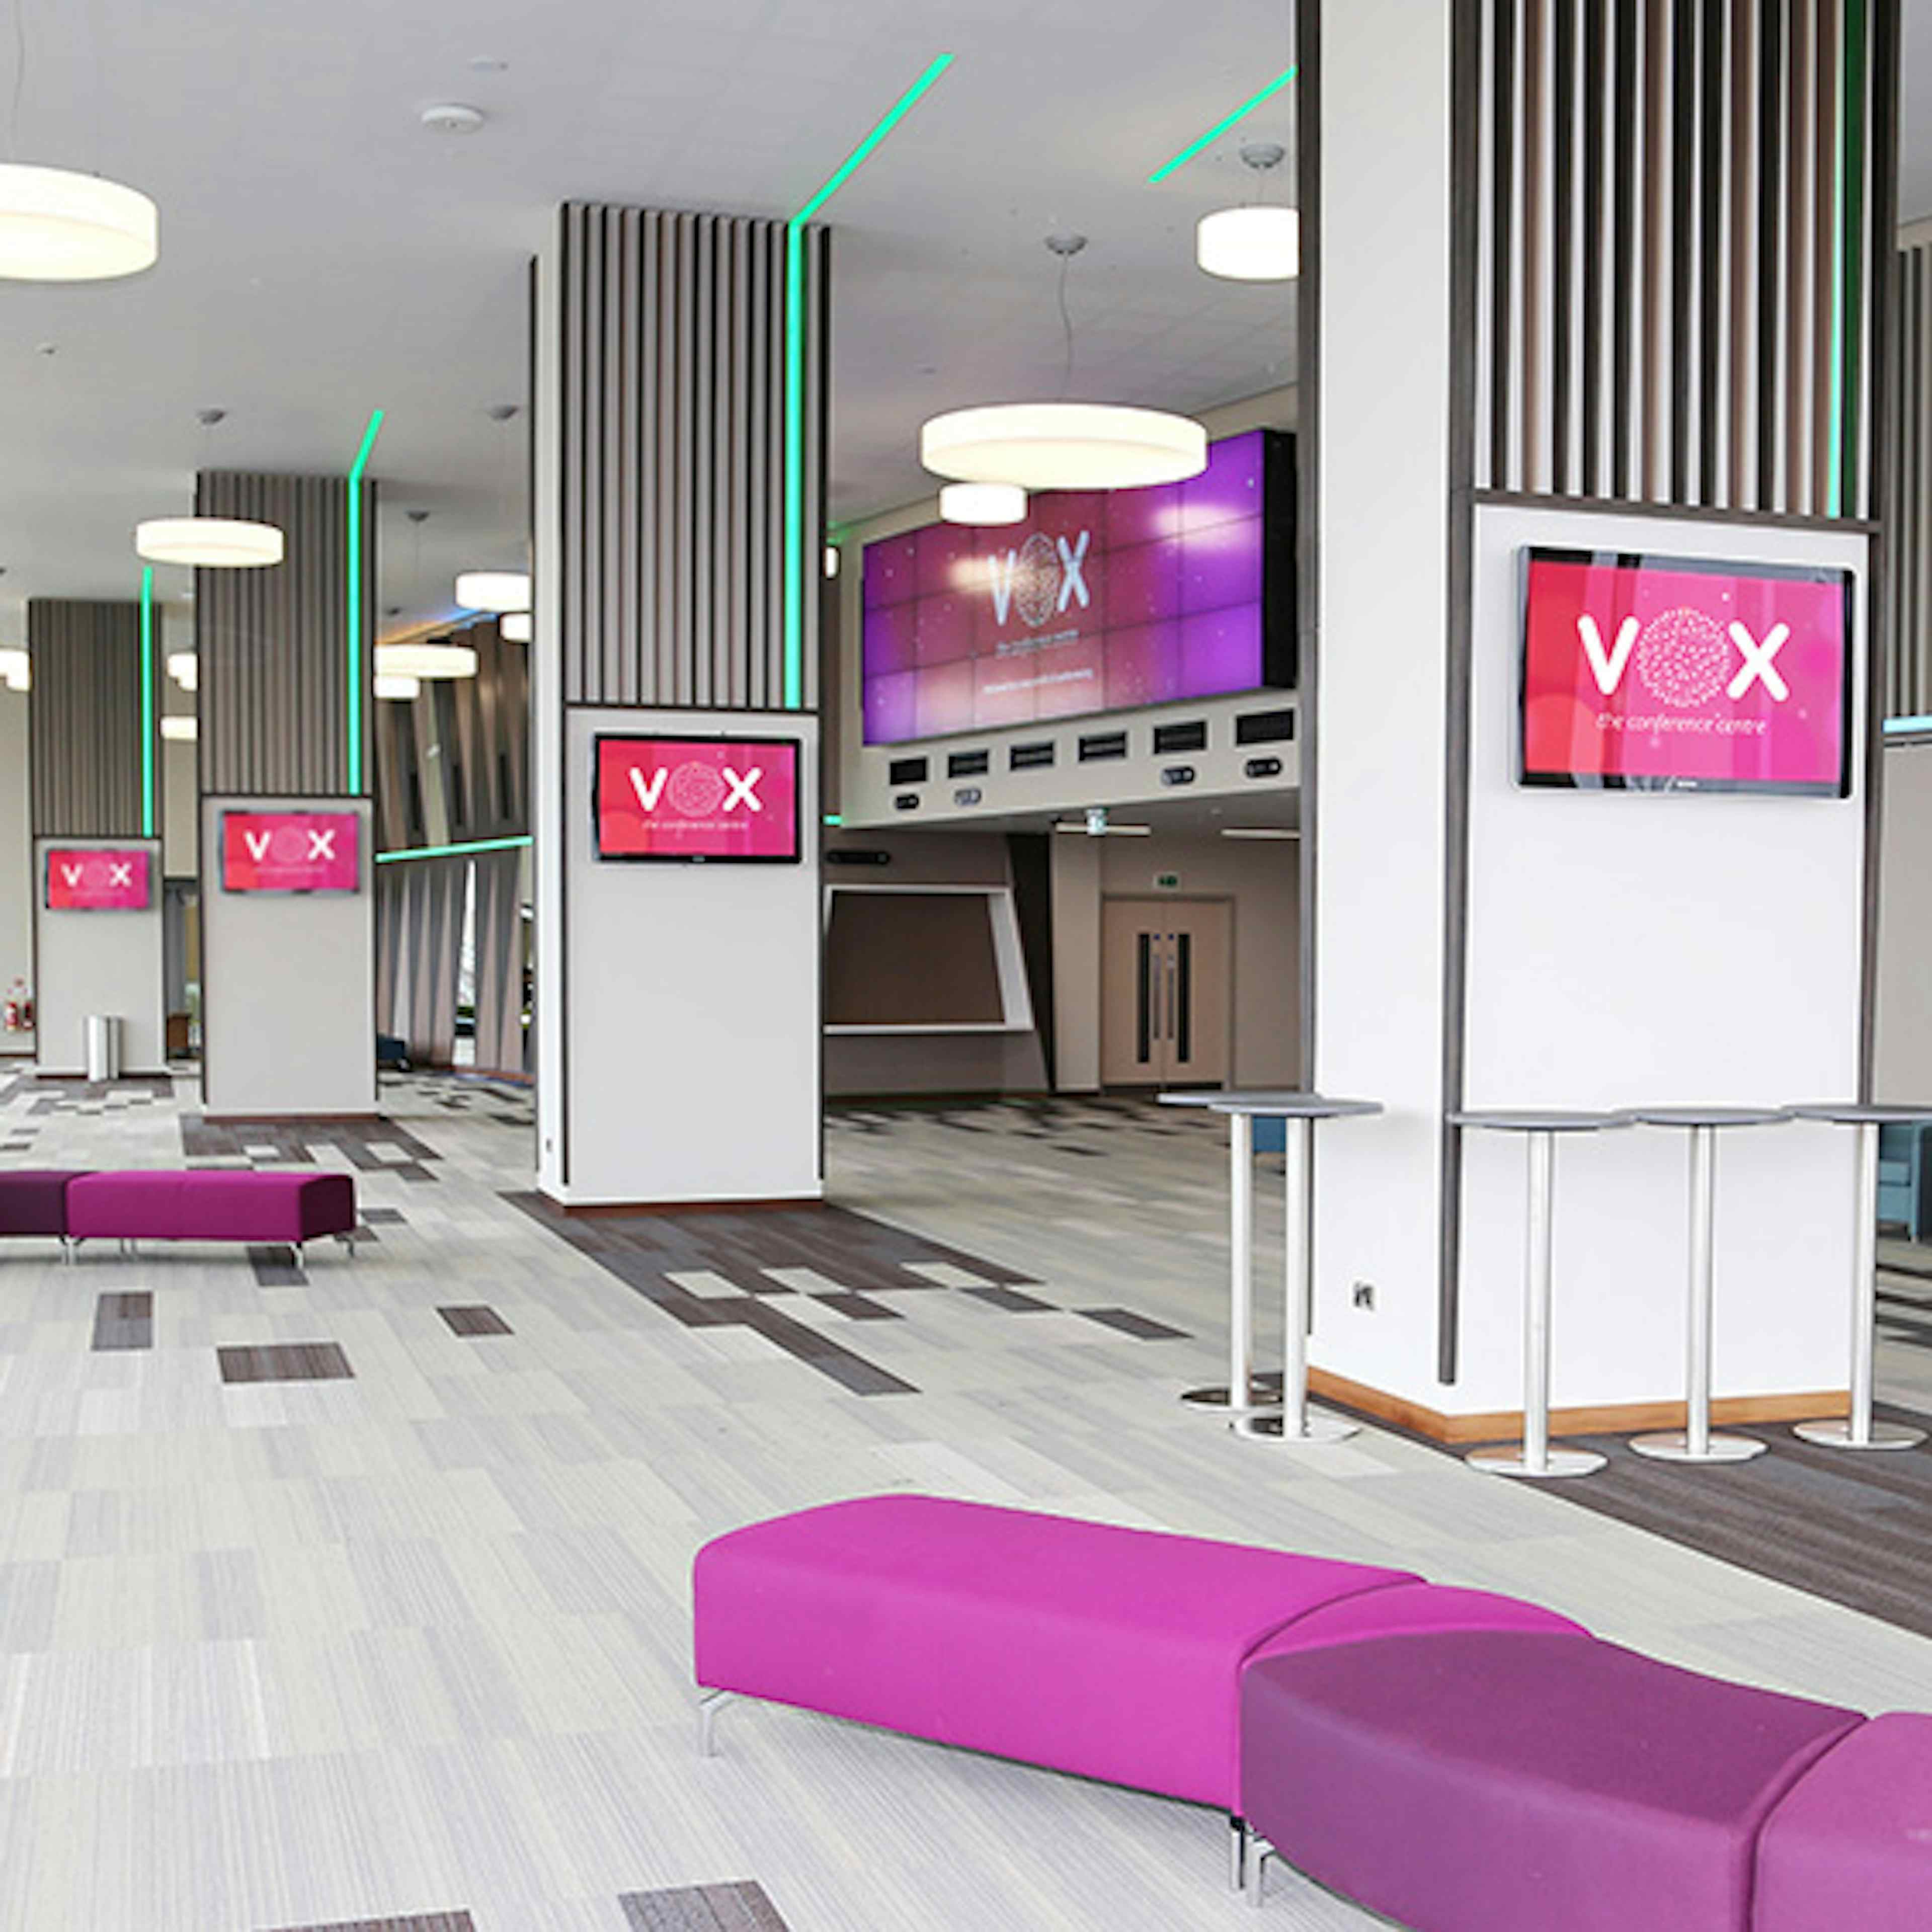 The Vox Conference Centre - Vox 1 and 2 image 2